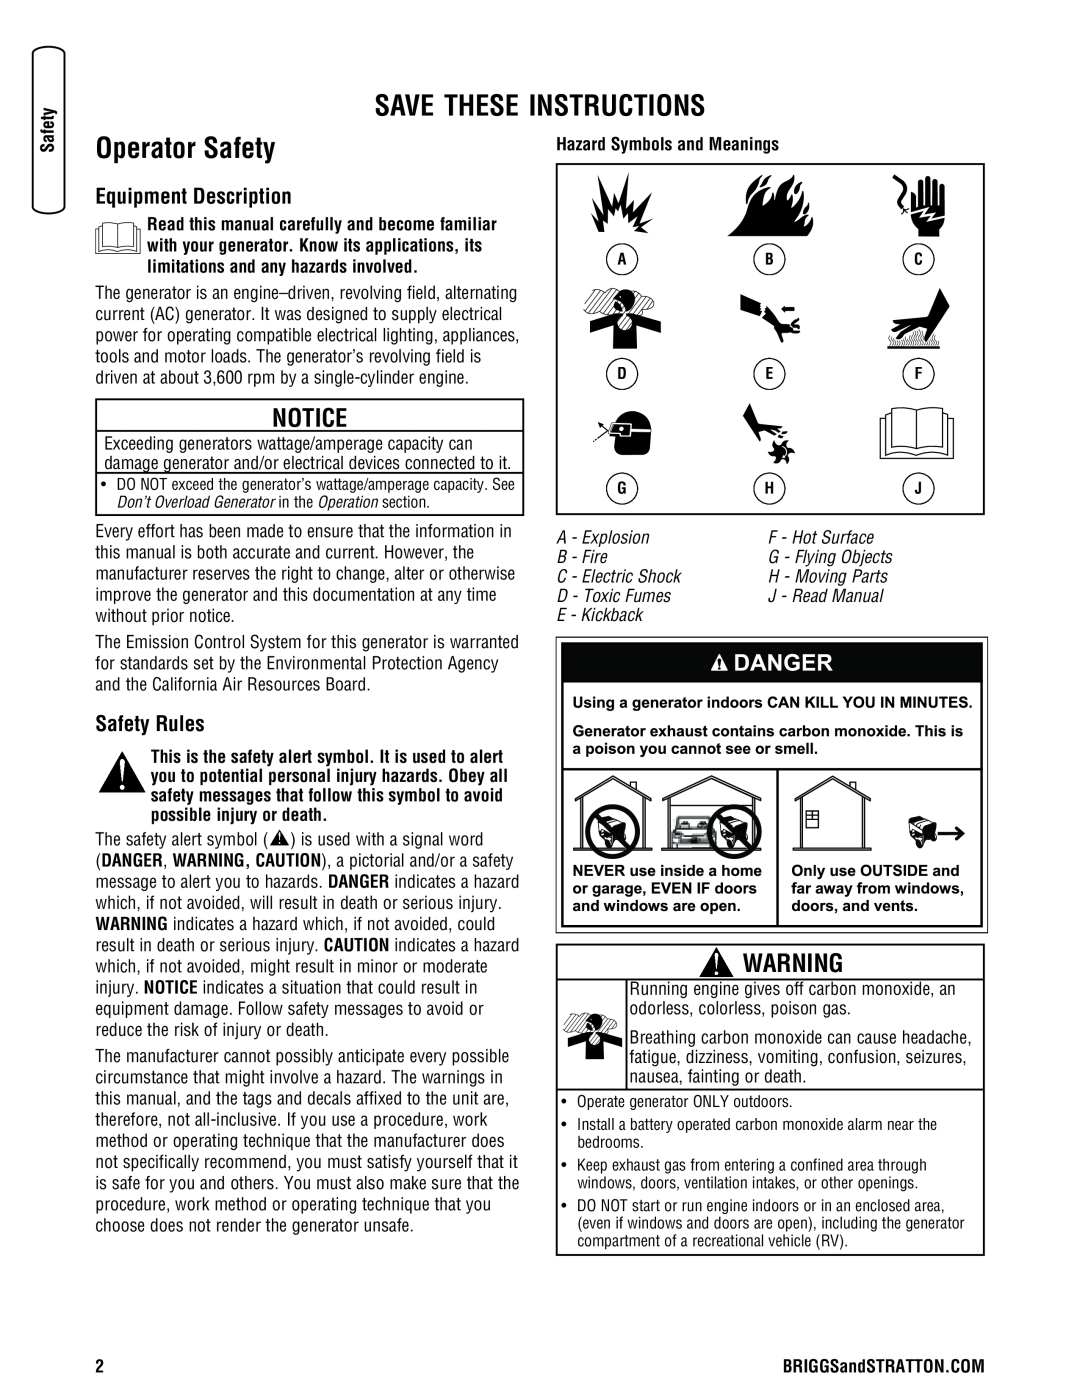 Briggs & Stratton 030248-0 manual Save These Instructions, Operator Safety, Equipment Description, Safety Rules 